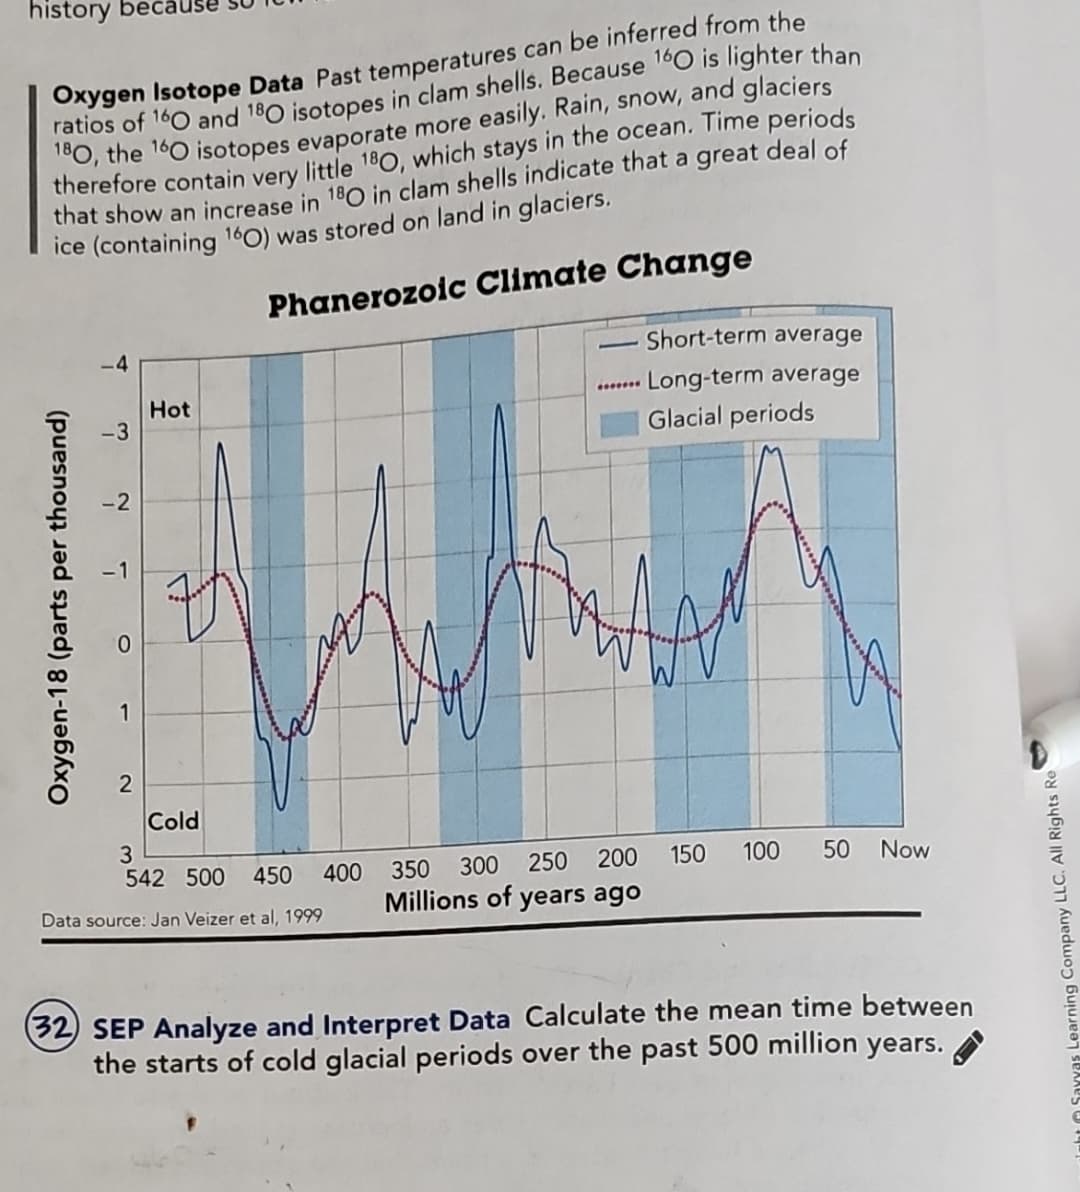 history be
Oxygen Isotope Data Past temperatures can be inferred from the
ratios of 160 and 180 isotopes in clam shells. Because 160 is lighter than
180, the 160 isotopes evaporate more easily. Rain, snow, and glaciers
therefore contain very little 180, which stays in the ocean. Time periods
that show an increase in 180 in clam shells indicate that a great deal of
ice (containing 160) was stored on land in glaciers.
Phanerozoic Climate Change
4
2
Oxygen-18 (parts per thousand)
-3
7
1
2
Hot
Cold
3
542 500
450
Data source: Jan Veizer et al, 1999
400
-
*******
350
250 200
300
Millions of years ago
Short-term average
Long-term average
Glacial periods
150 100 50
Now
(32) SEP Analyze and Interpret Data Calculate the mean time between
the starts of cold glacial periods over the past 500 million years.
Sayyas Learning Company LLC. All Rights Re